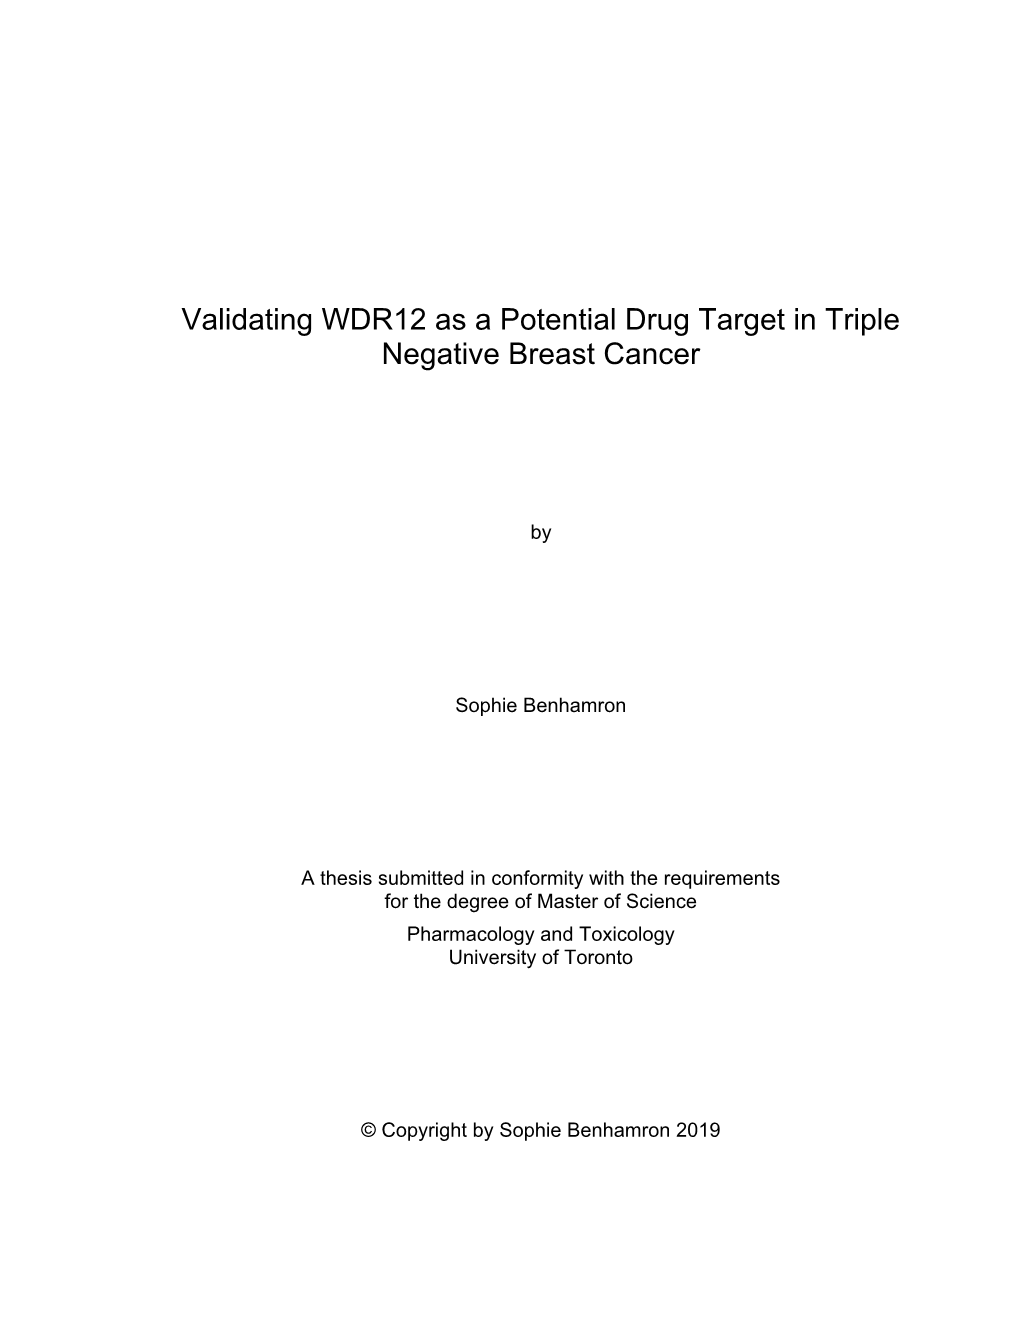 Validating WDR12 As a Potential Drug Target in Triple Negative Breast Cancer